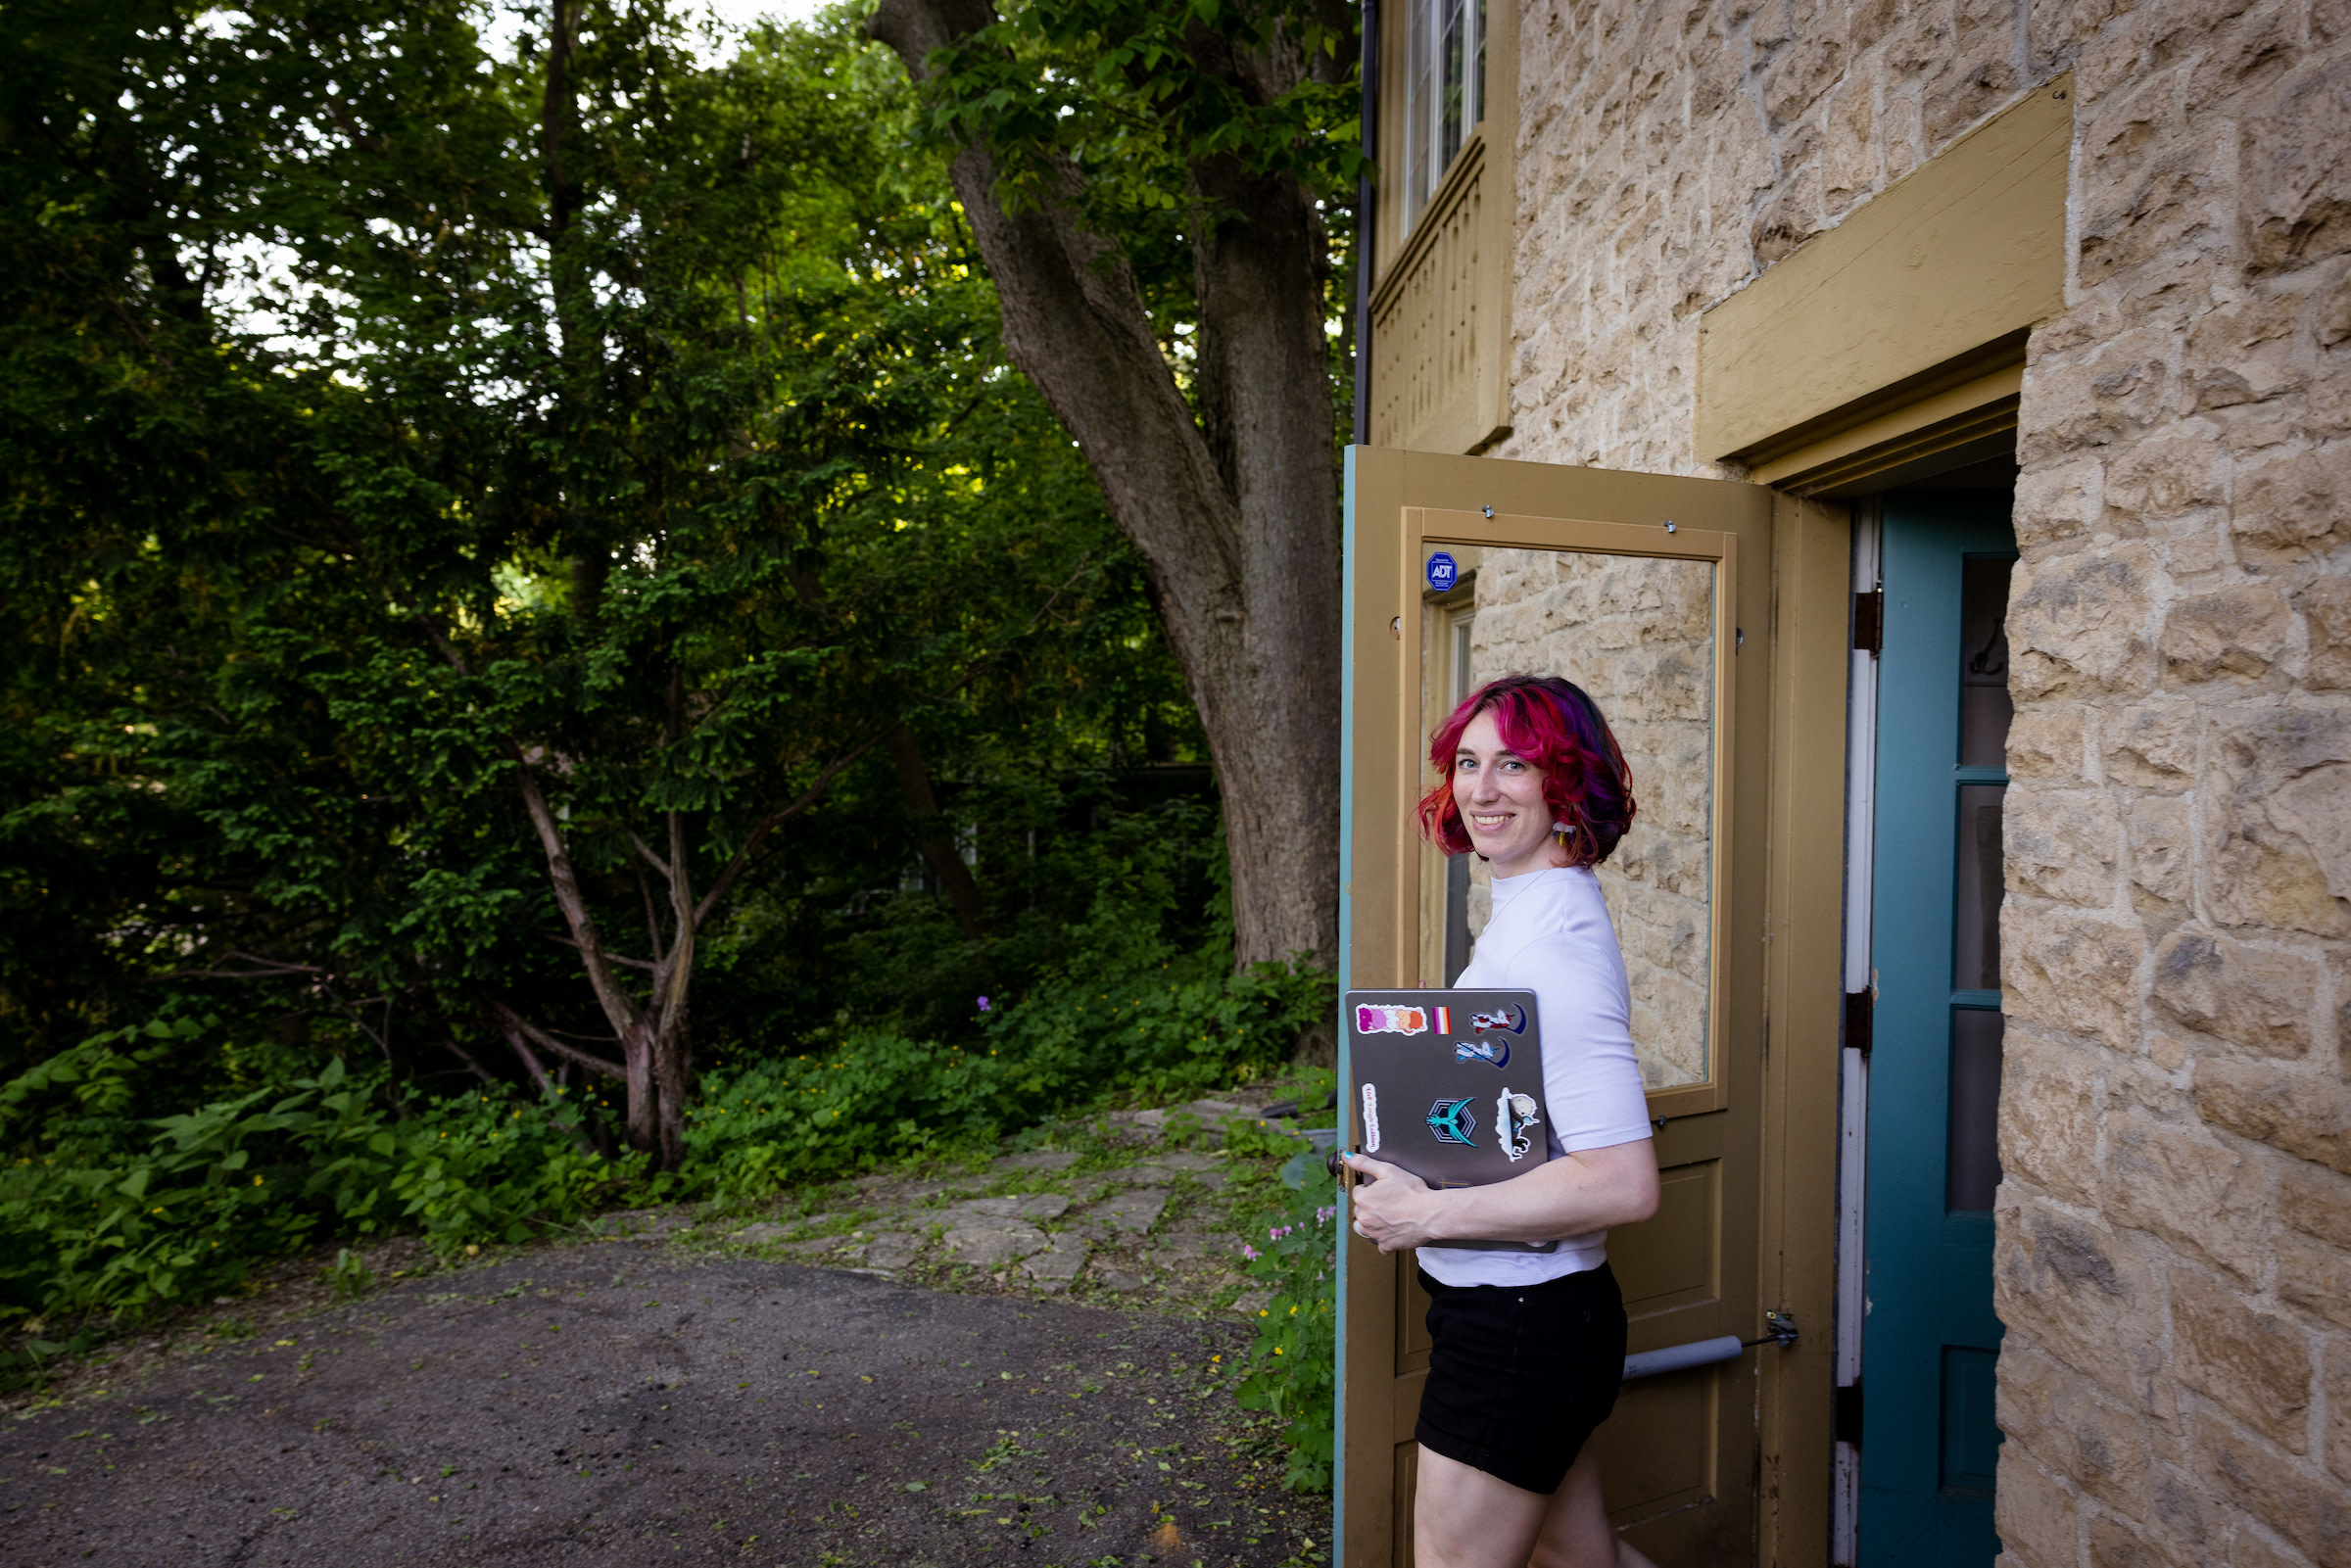 Kyler stands outside at an open door, holding her computer and smiling.